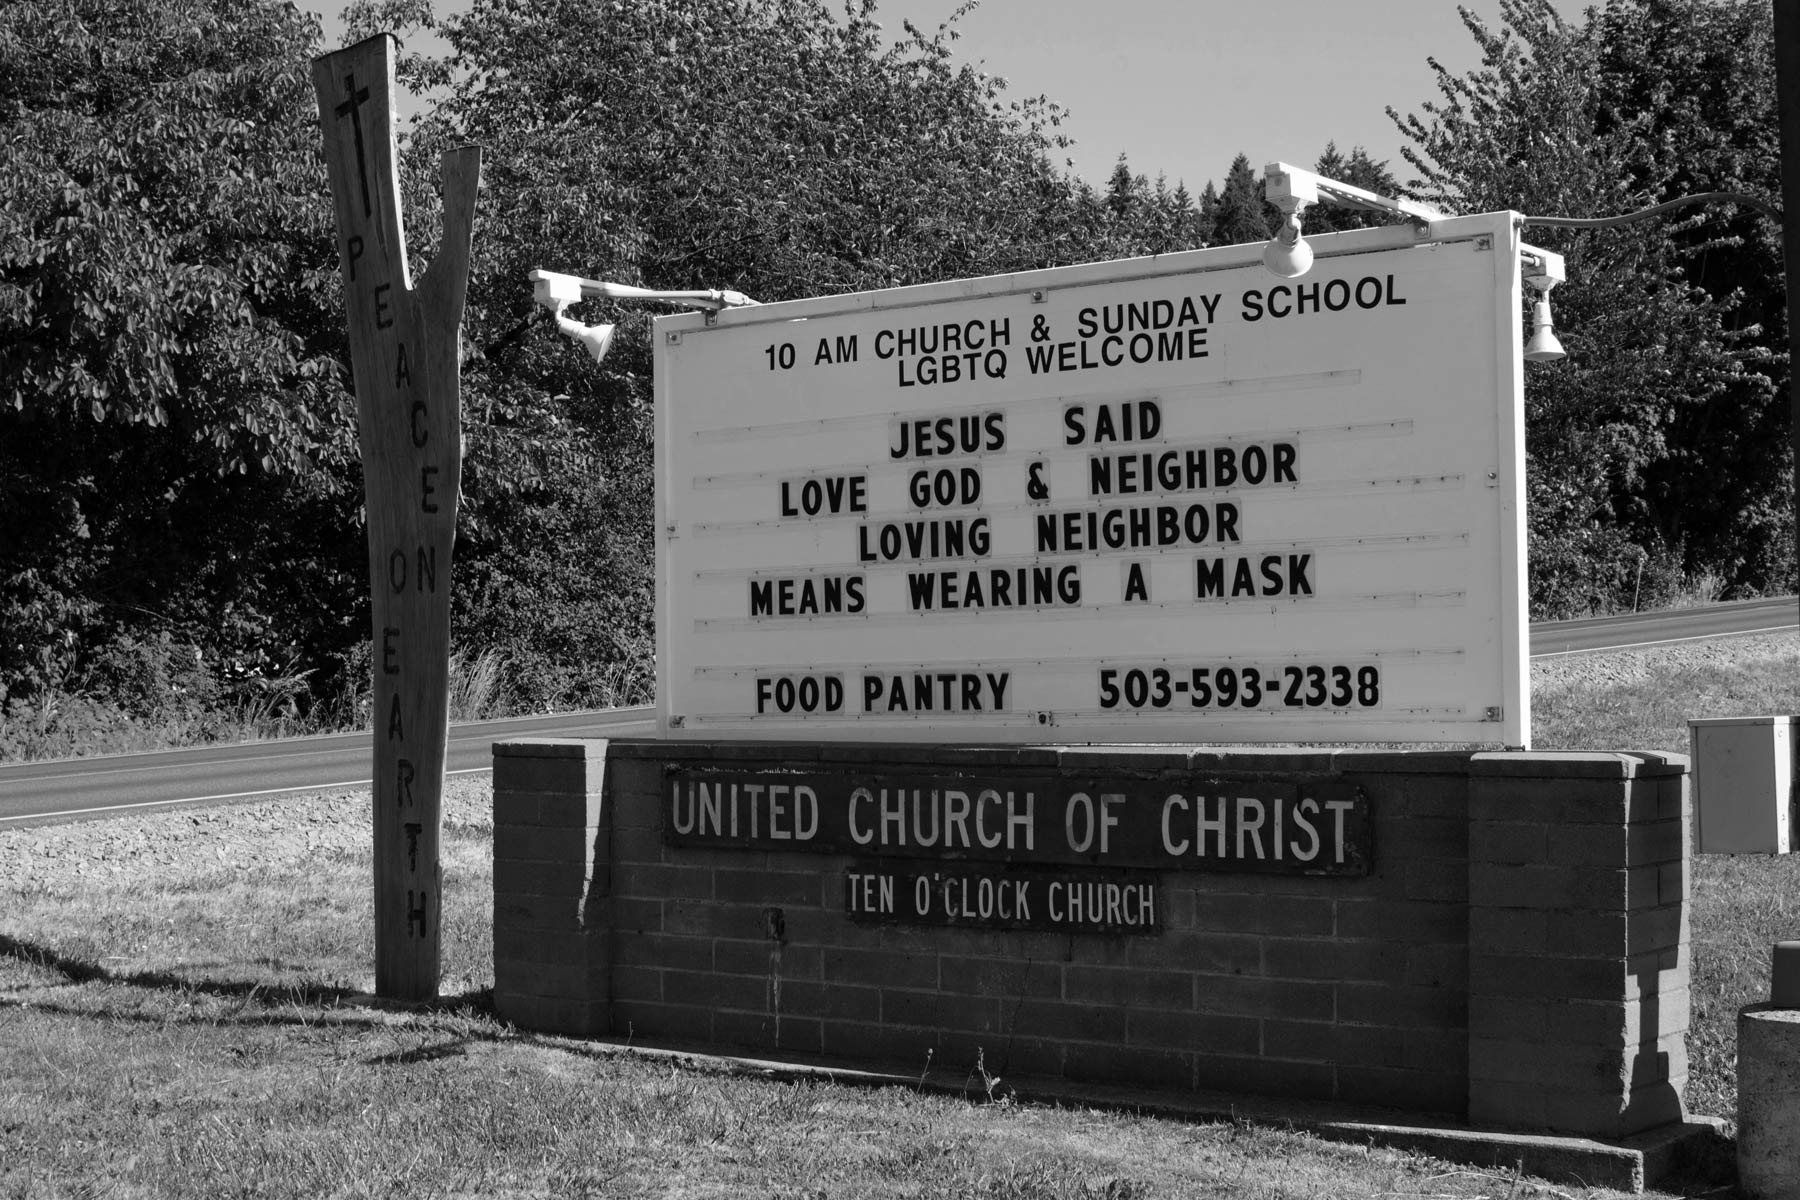 Readerboard outside the church reading Jesus said love God and neighbor, loving neighbor means wearing a mask, food pantry, wooden sign reads peace on earth